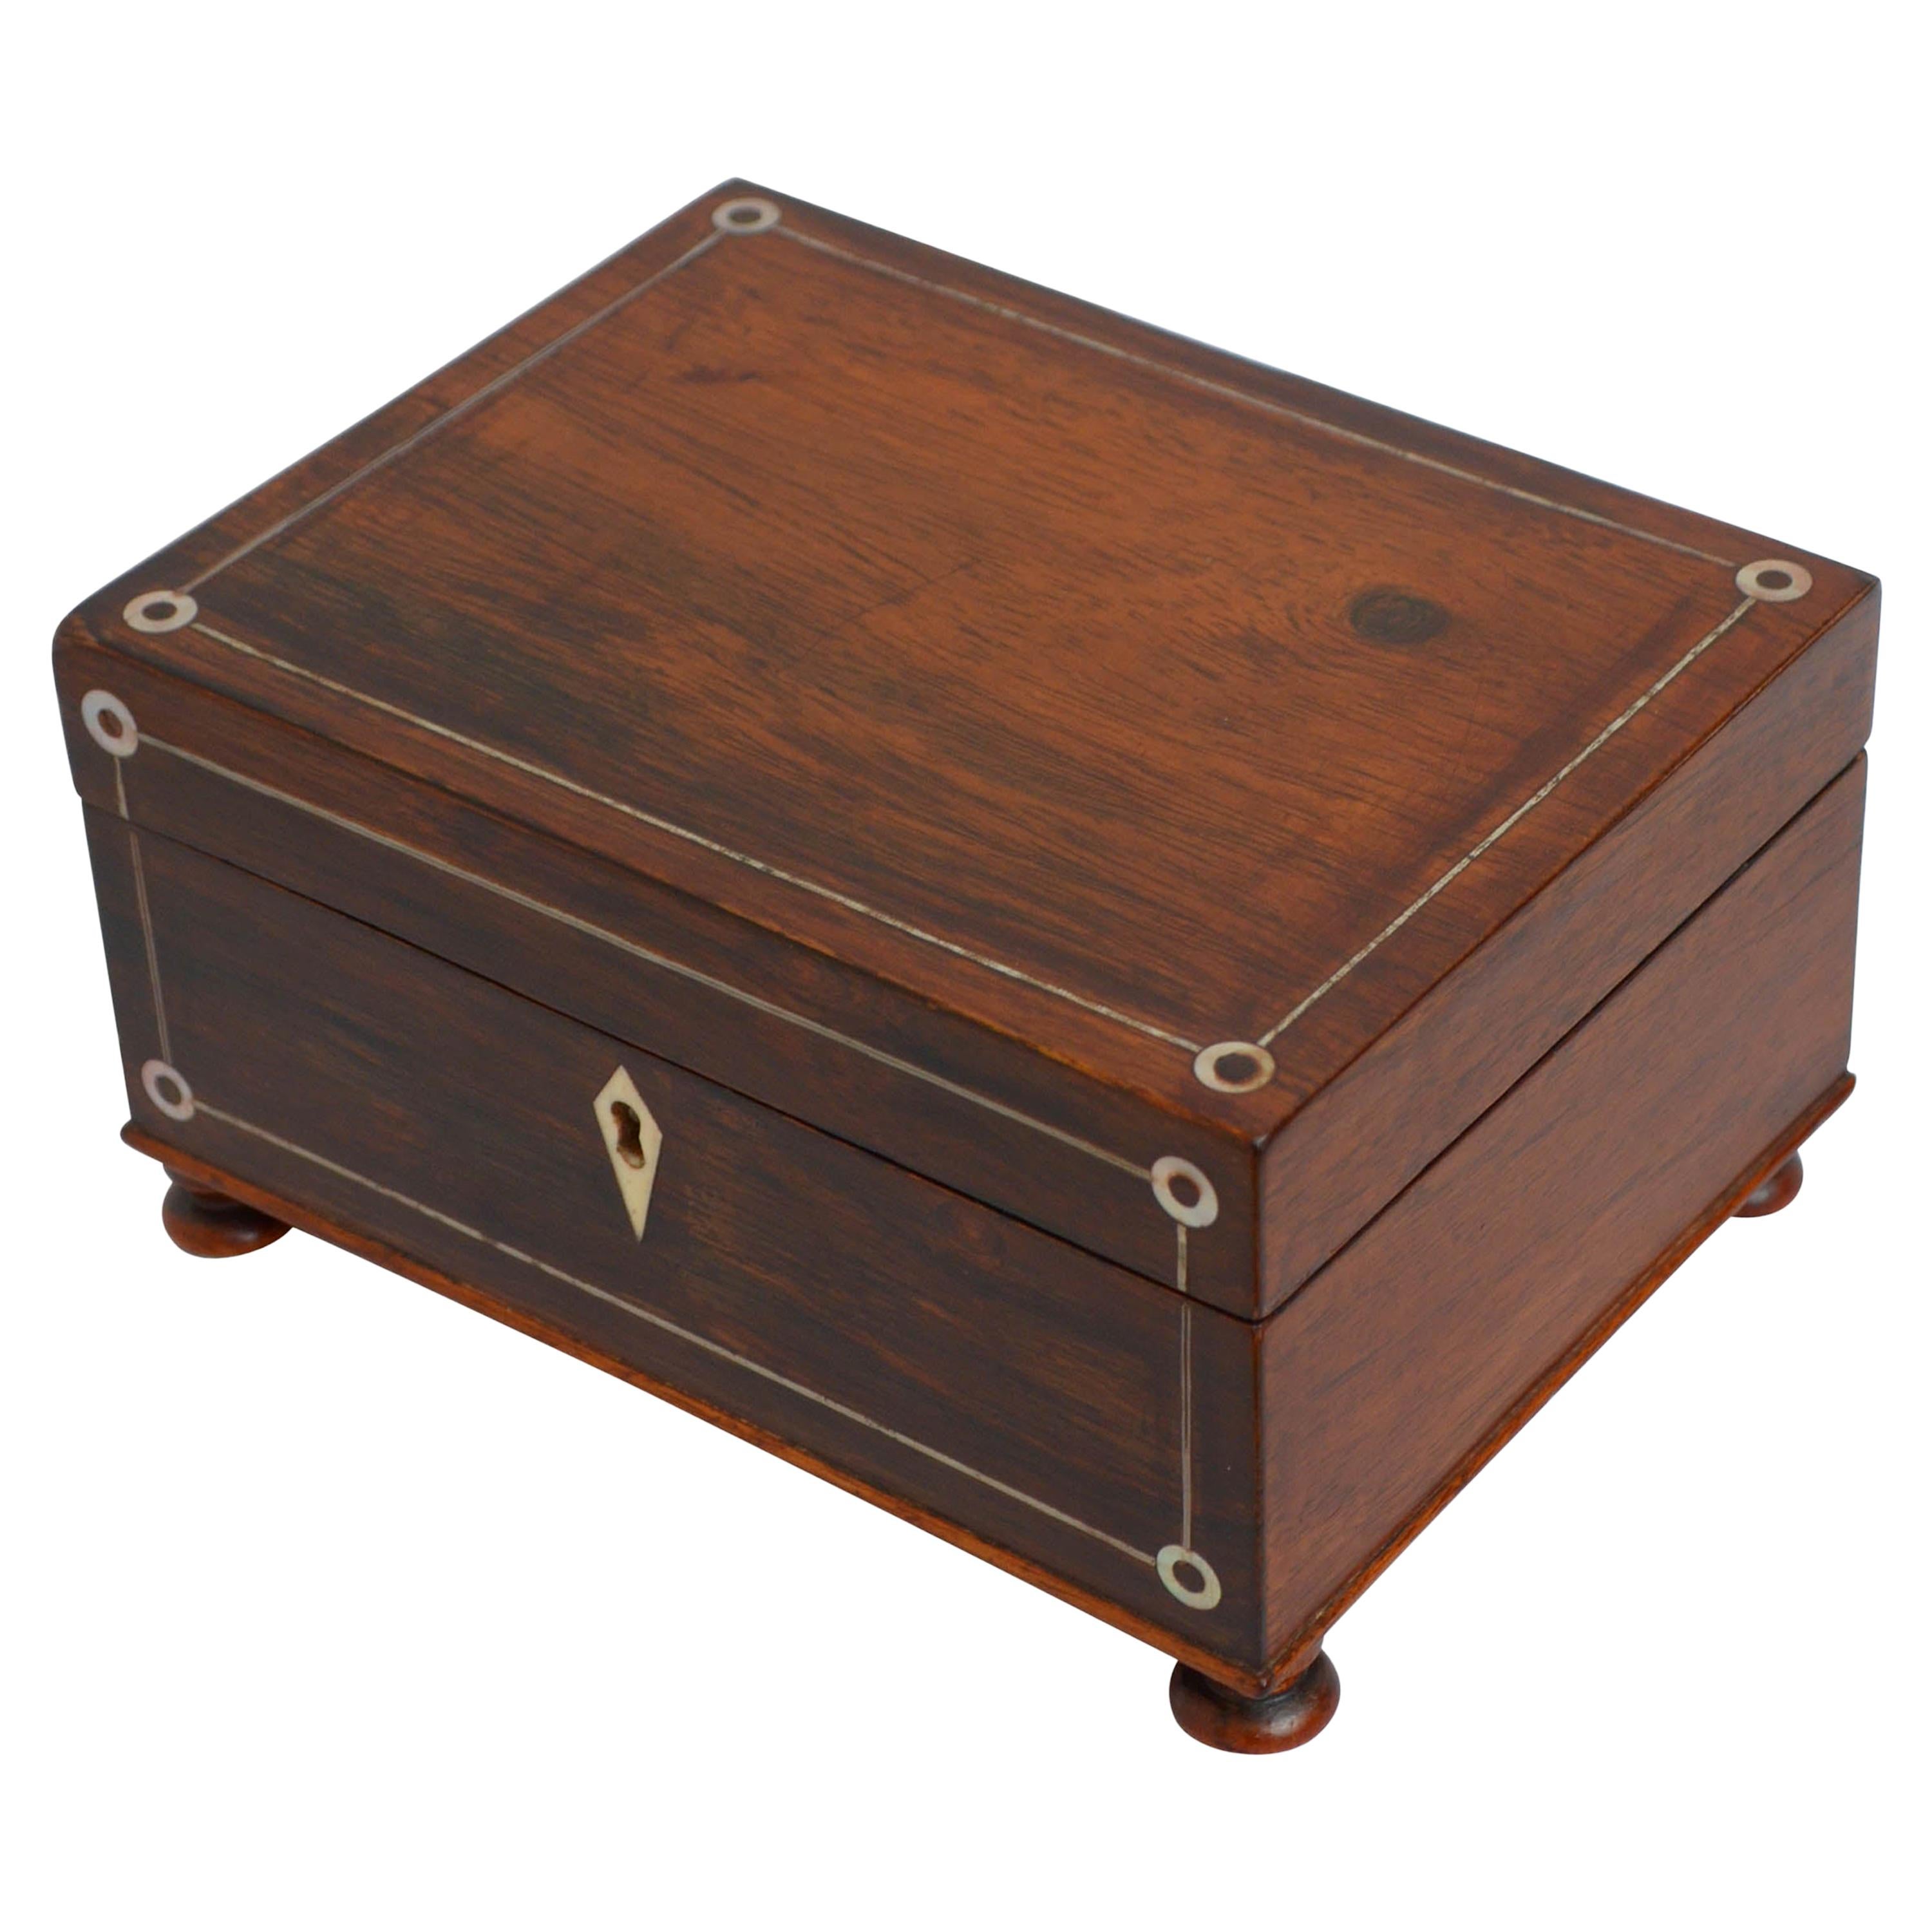 Attractive Victorian Rosewood Jewelry Box with Tray